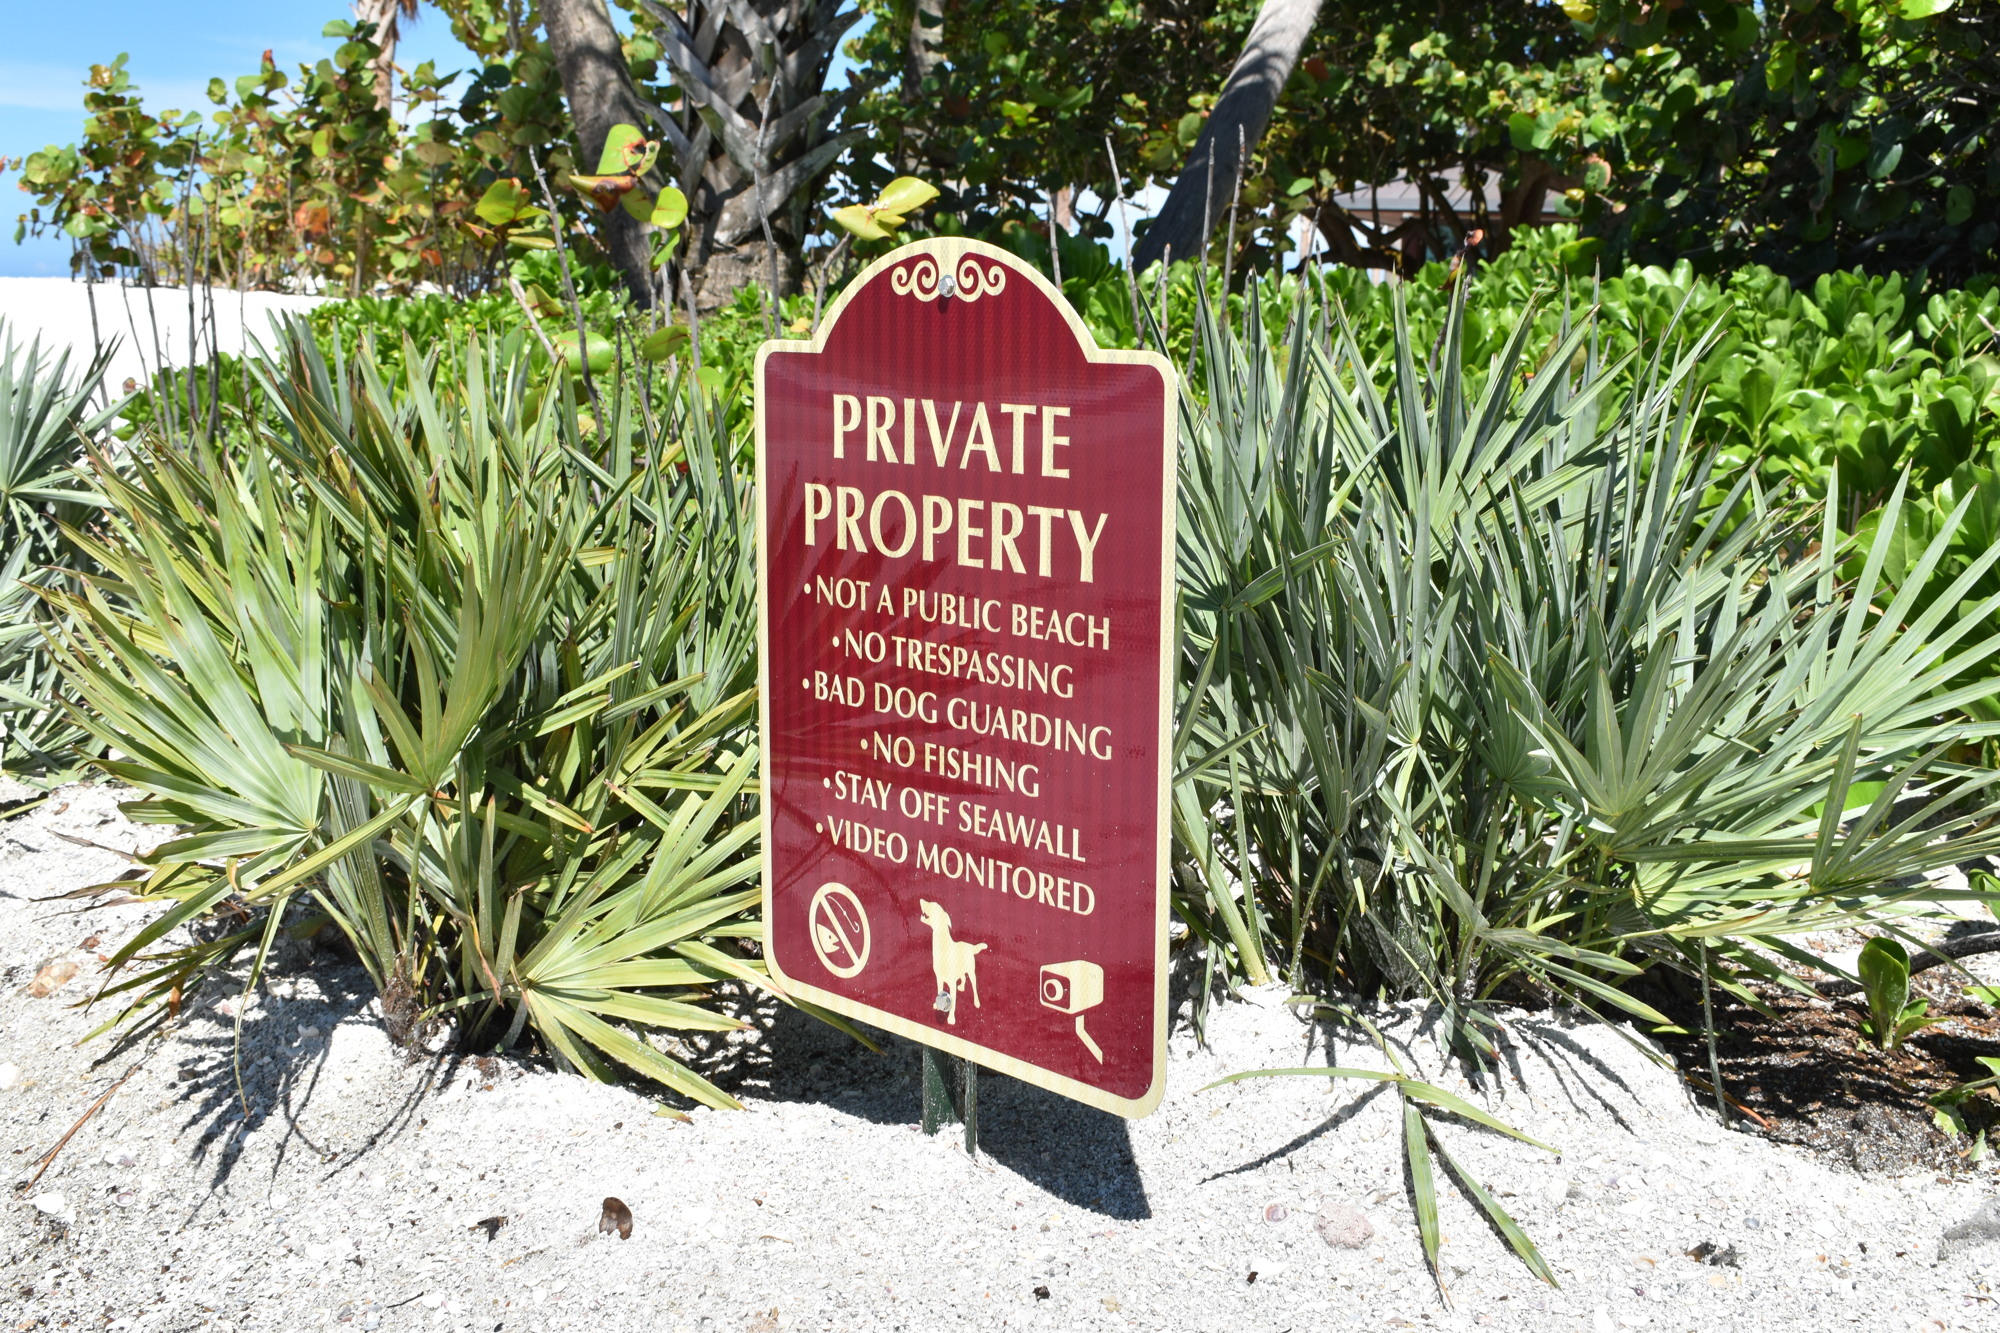 The Ohana owners have put signage on their private property to prevent people from trespassing.